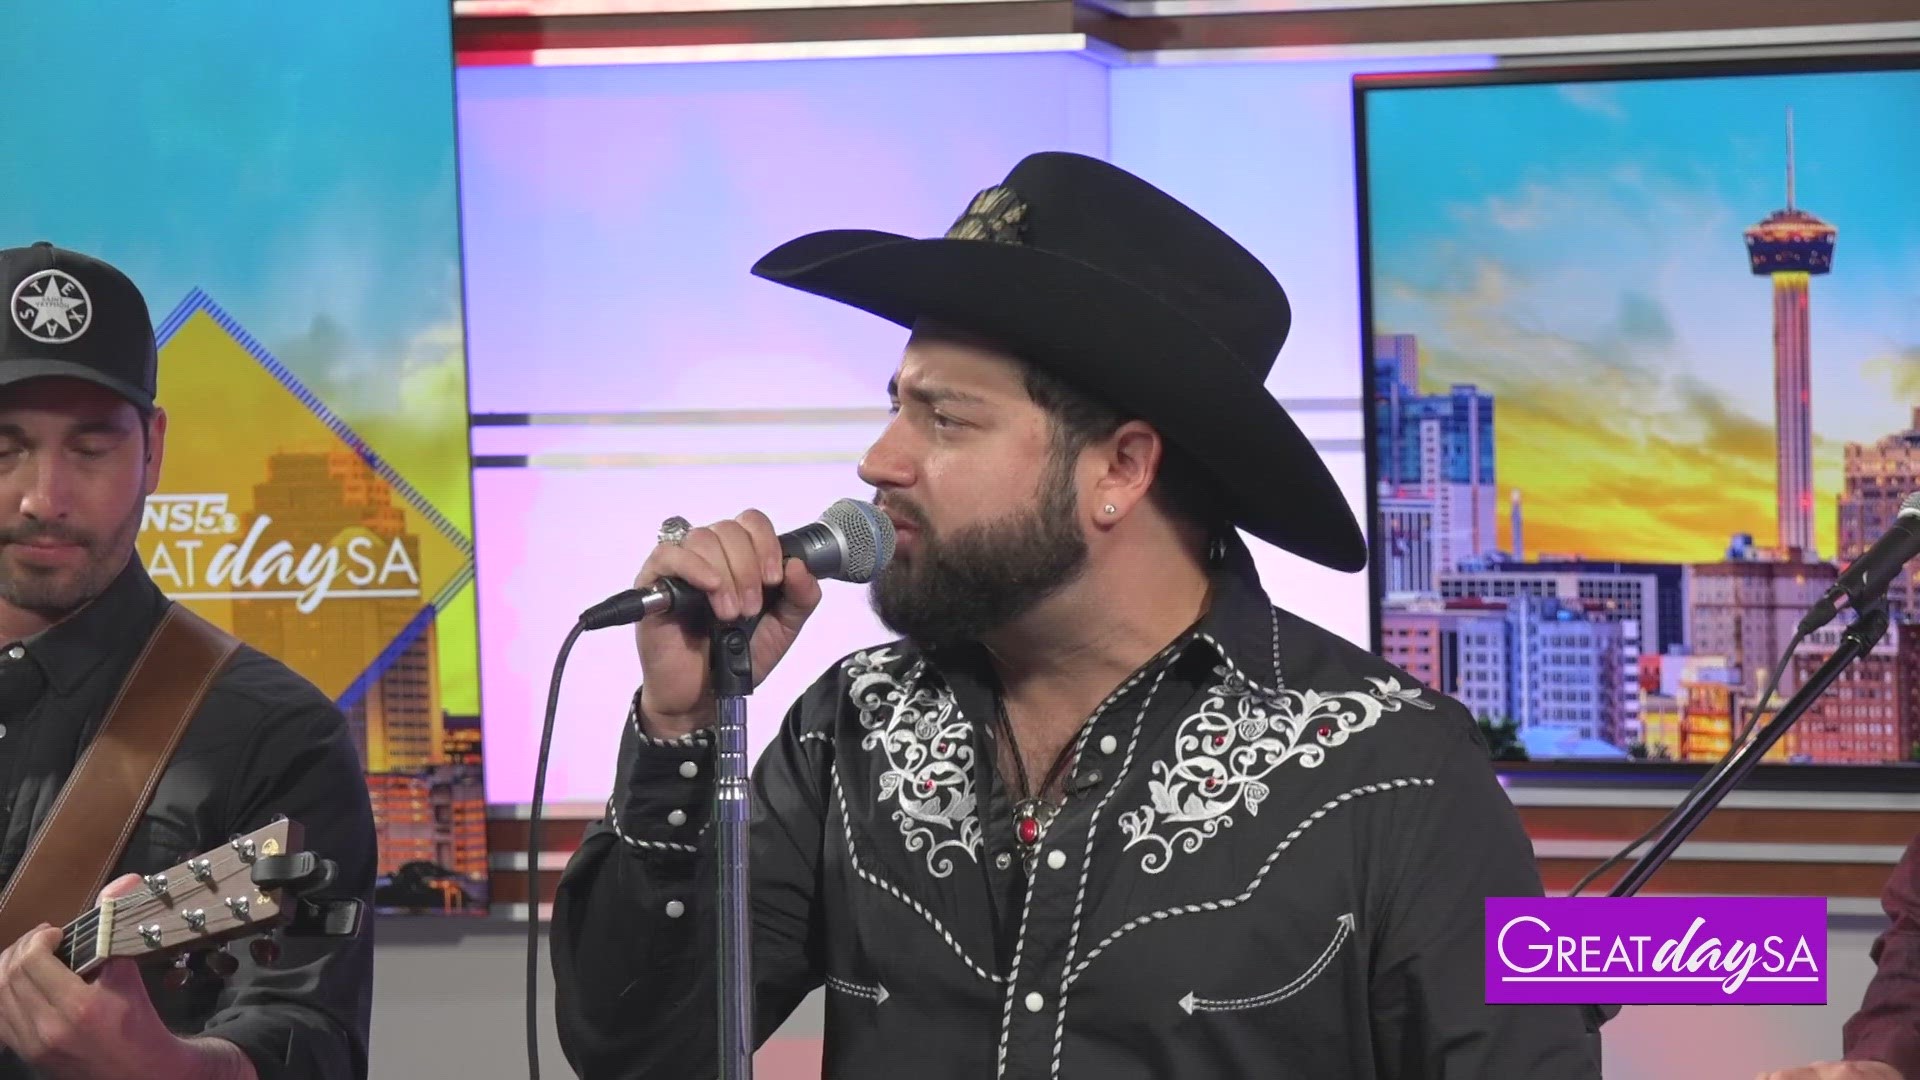 Country Artist Corey Weaver & his band perform in-studio.